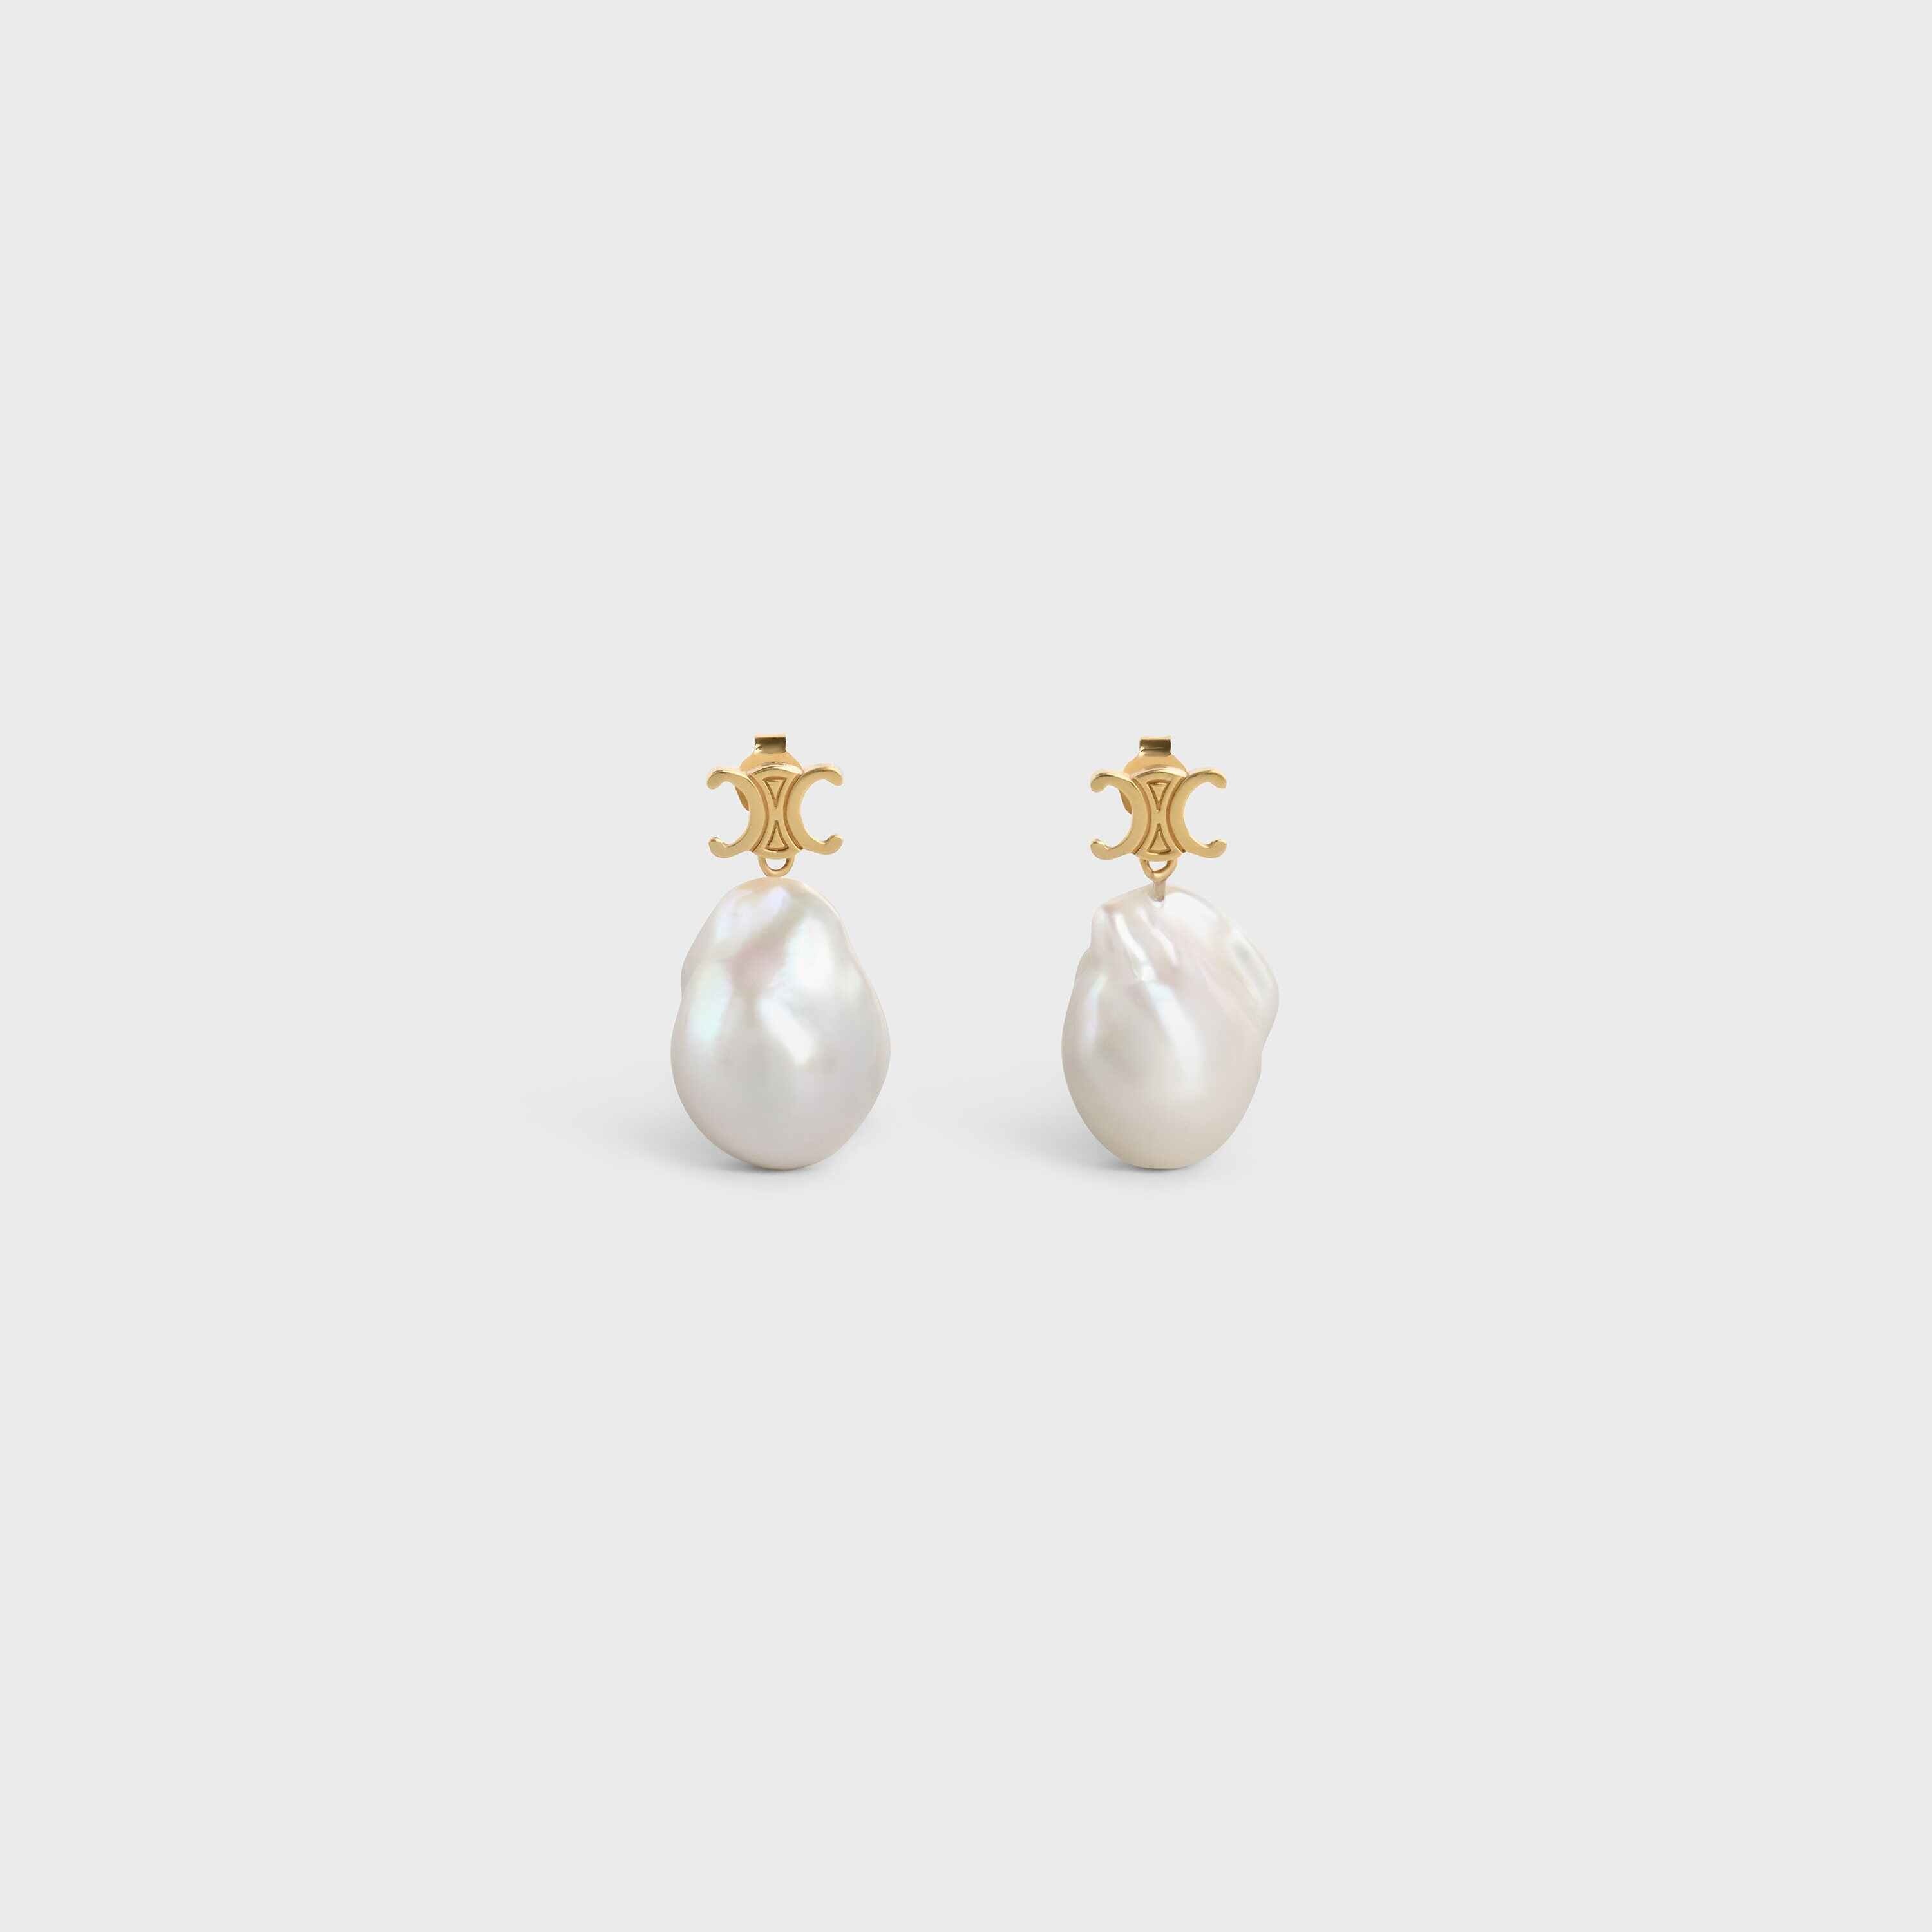 Baroque Triomphe Earrings in Brass with Gold Finish and Cultured Pearls - 1